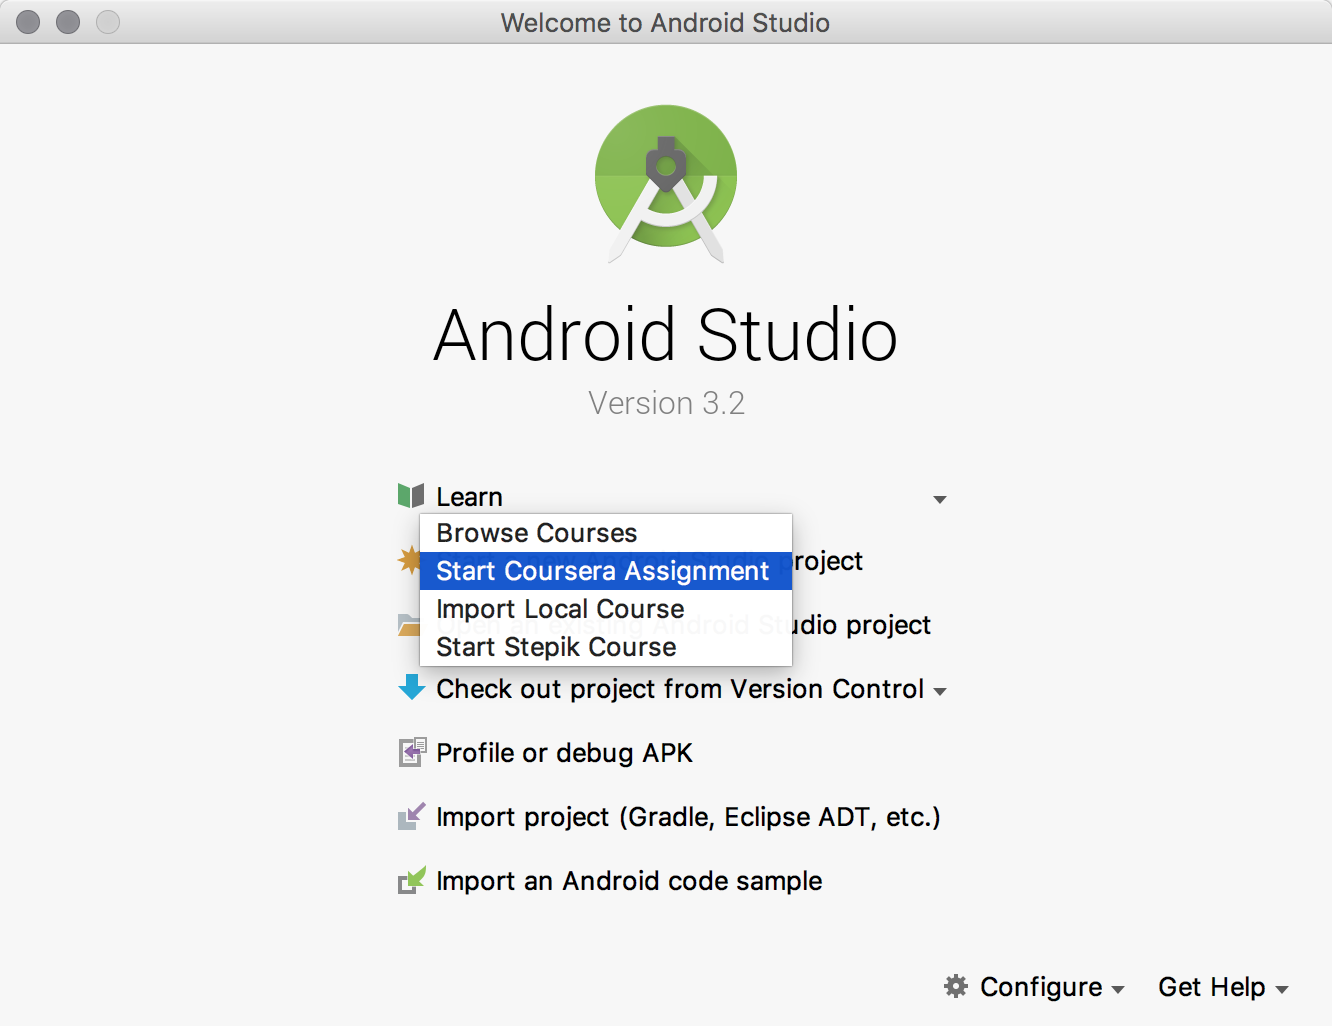 Coursera assignments in Android Studio